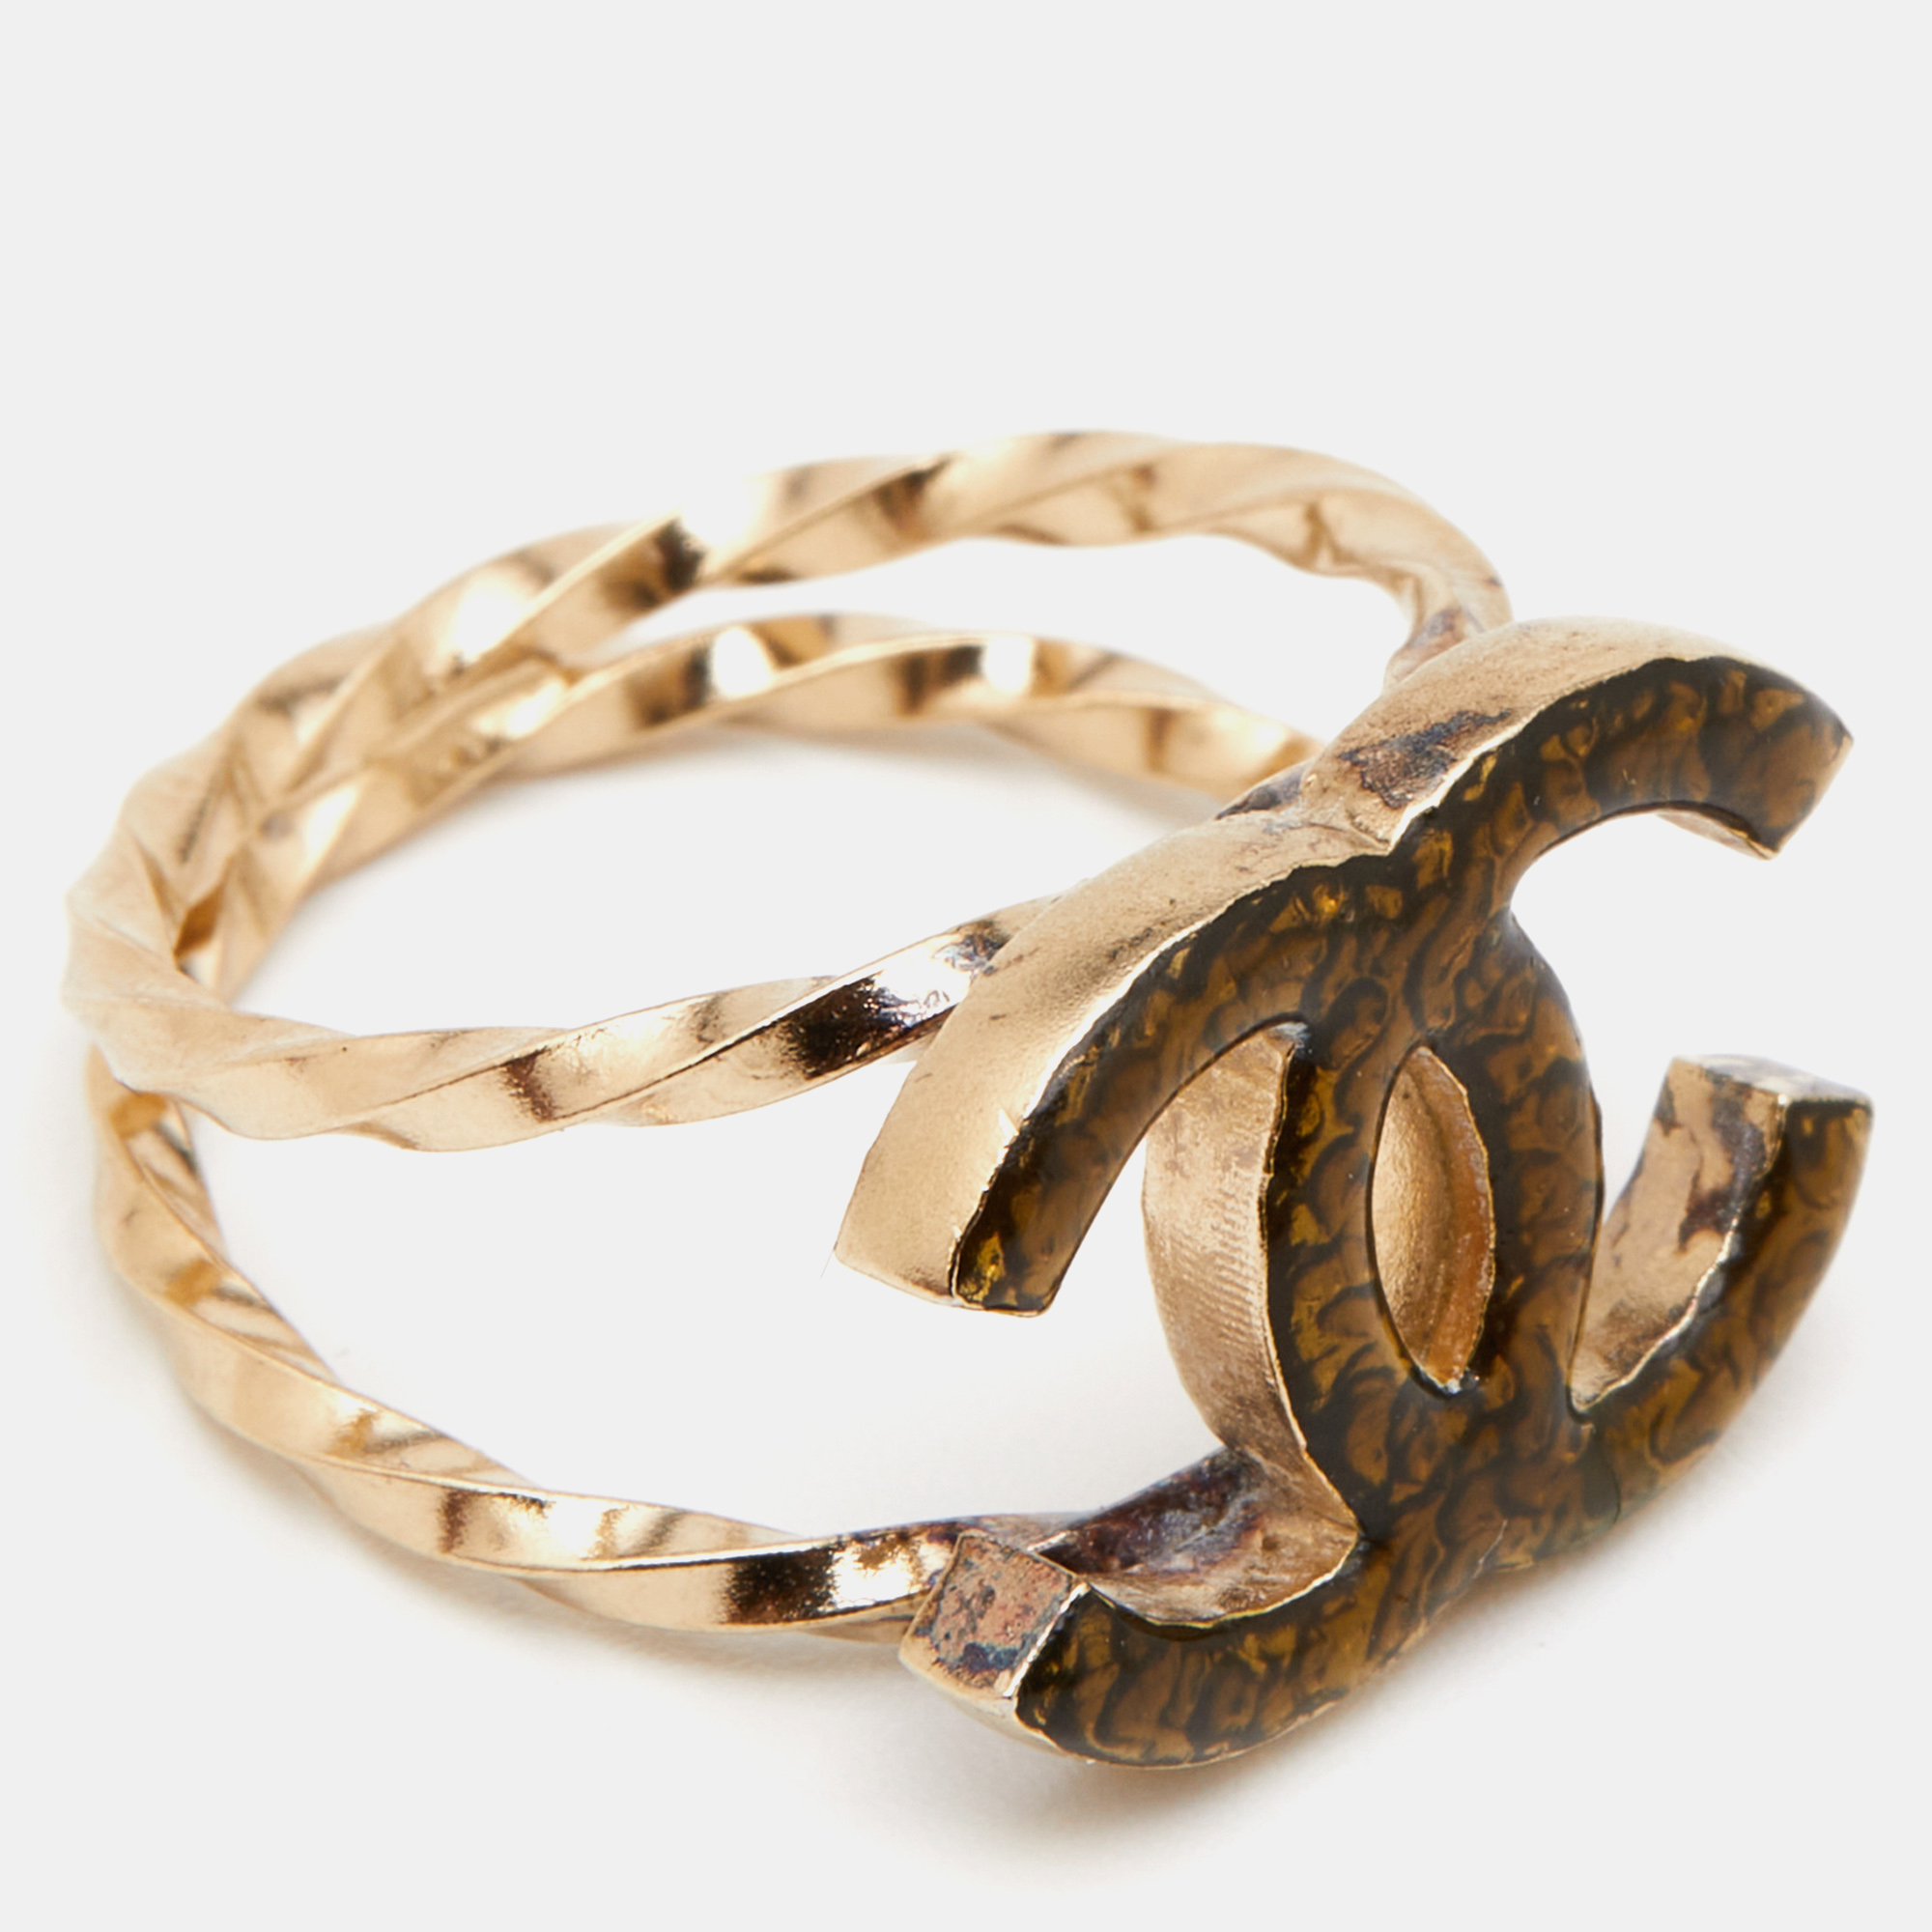 Chanel CC Resin Gold Tone Ring Size 53